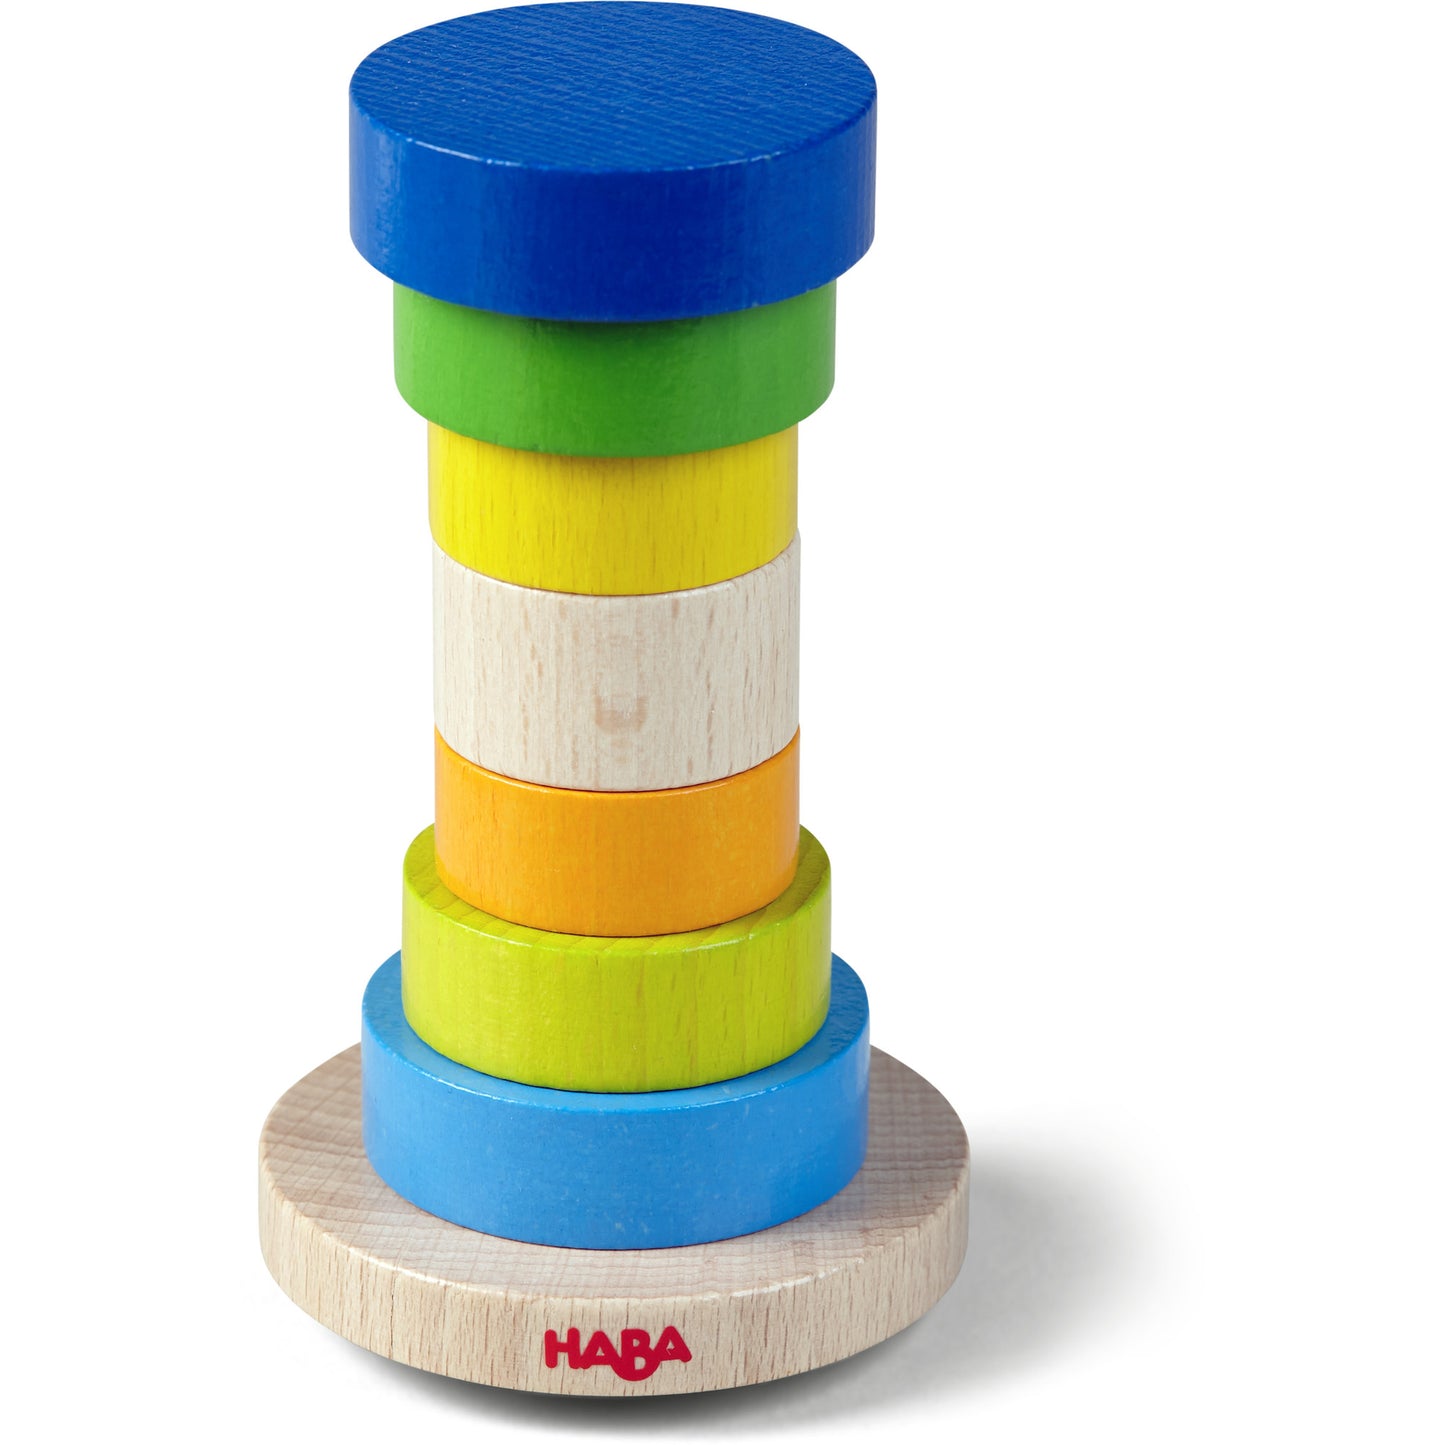 HABA - Wobbly Tower Stacking Game